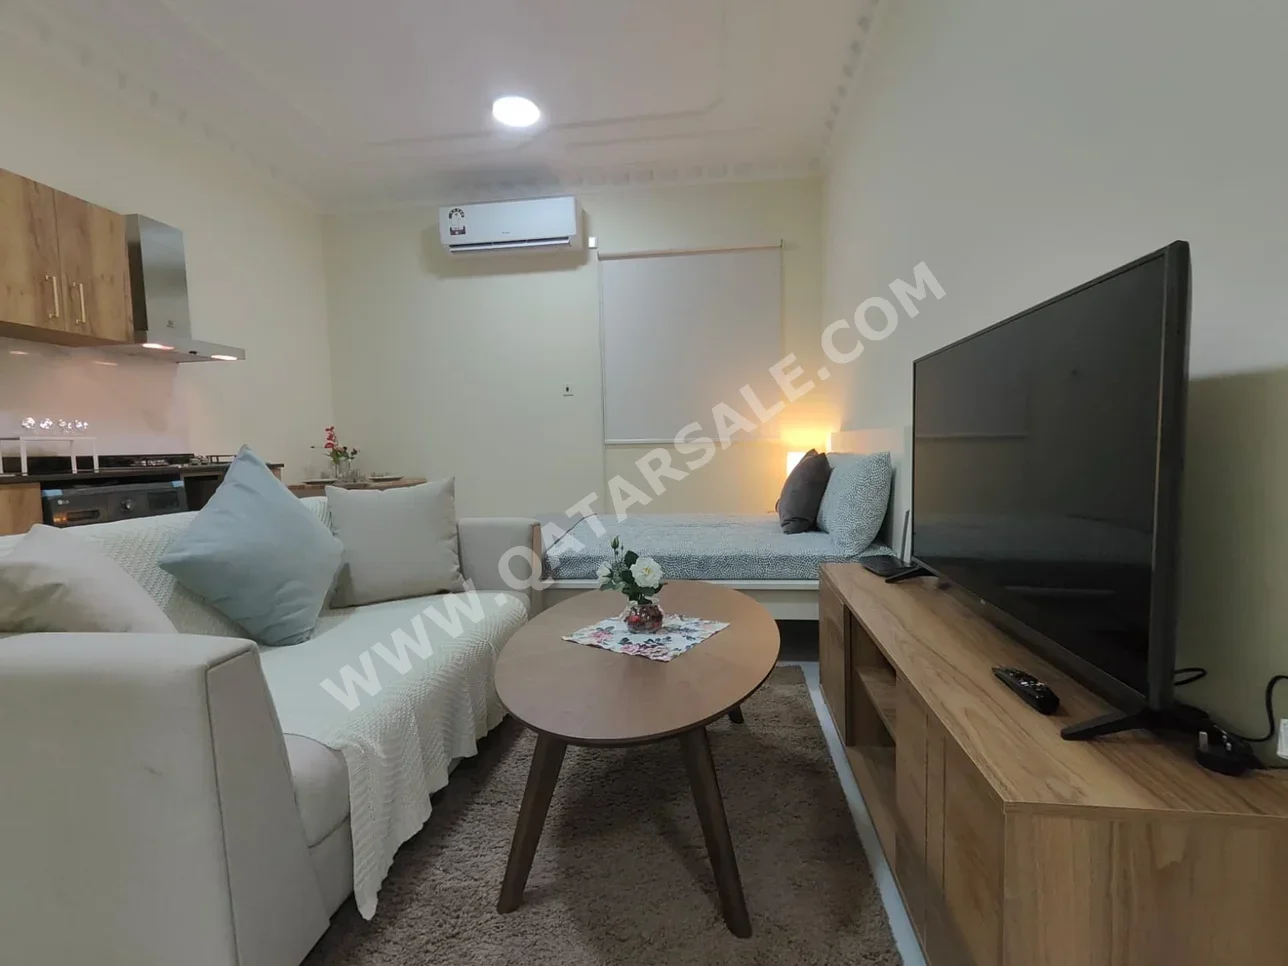 Studio  For Rent  in Doha -  Al Duhail  Fully Furnished